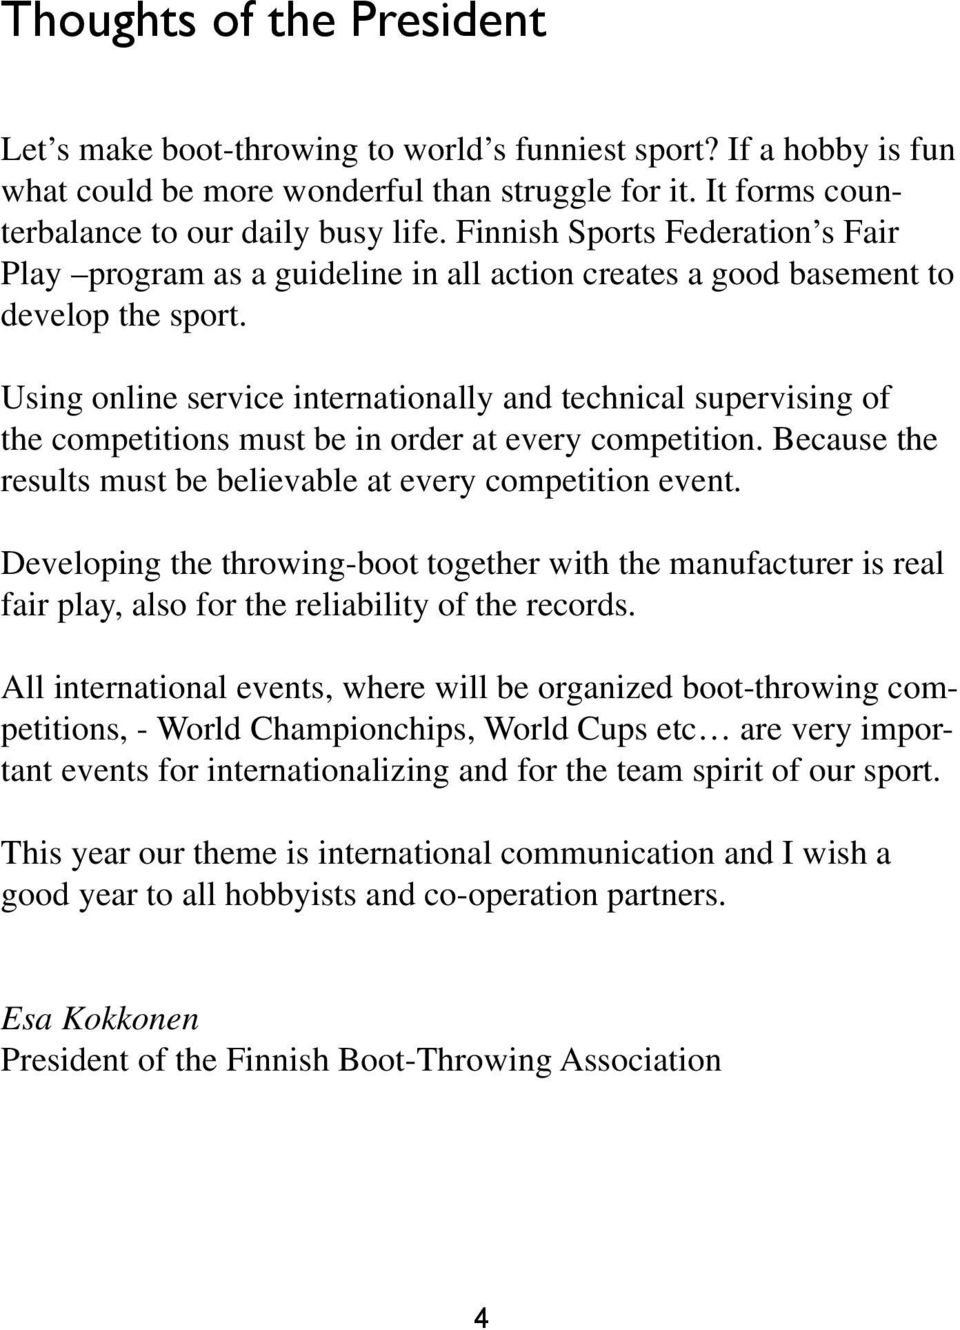 Using online service internationally and technical supervising of the competitions must be in order at every competition. Because the results must be believable at every competition event.